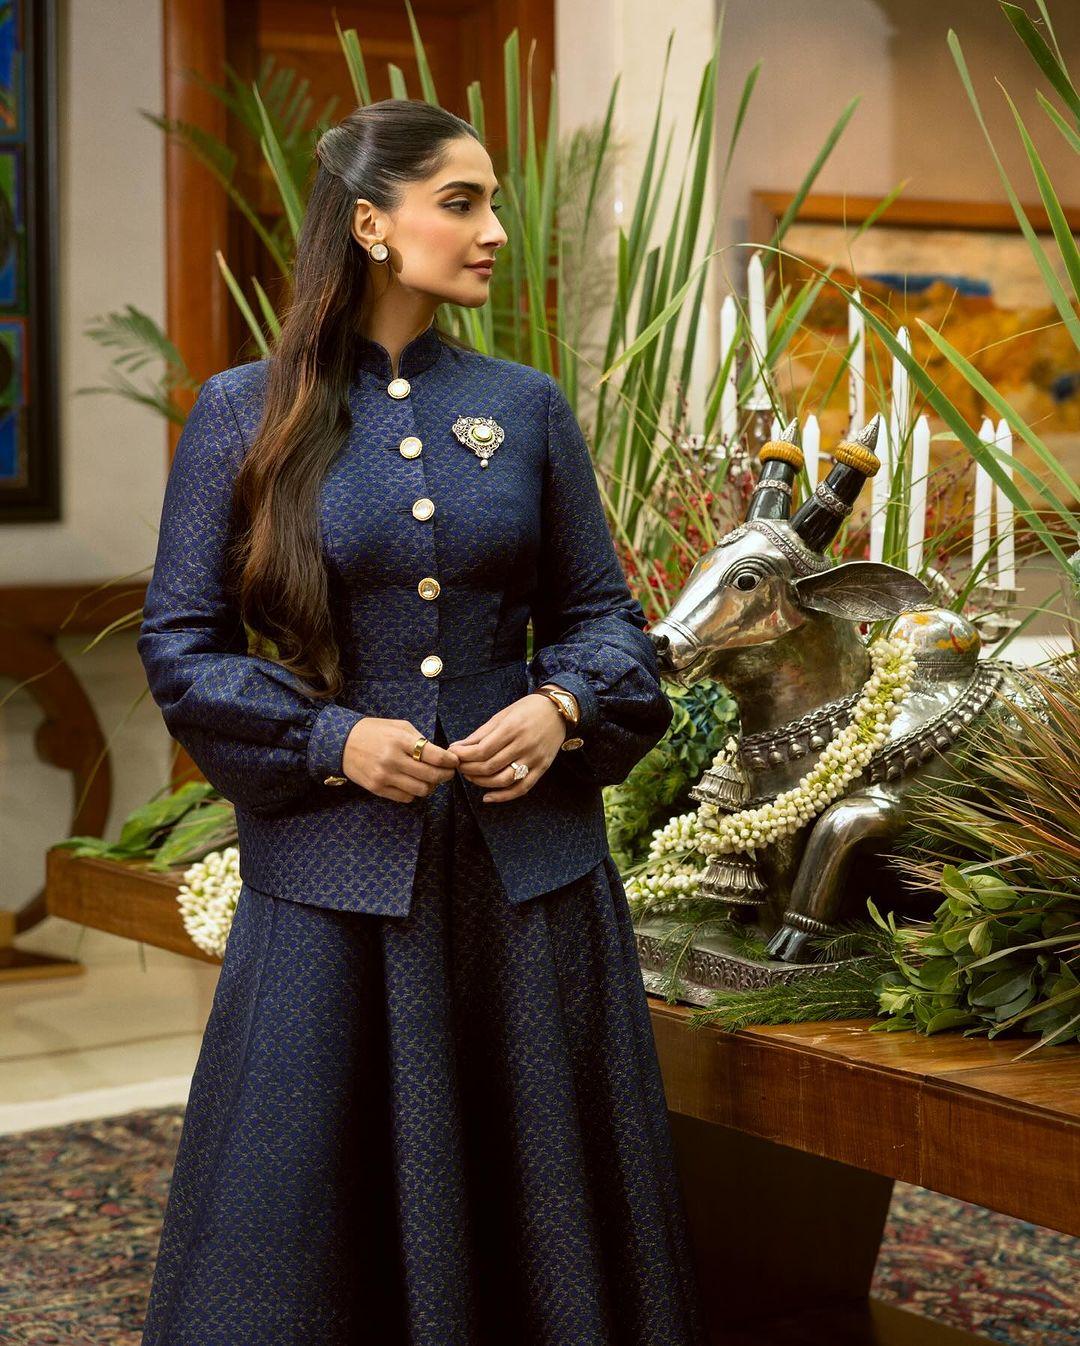 Sonam Kapoor wore a custom royal blue outfit by Kunal Rawal, featuring balloon-like sleeves and a full-sleeved, closed dark blue shirt with golden buttons. The standout piece was a gorgeous golden statement brooch.